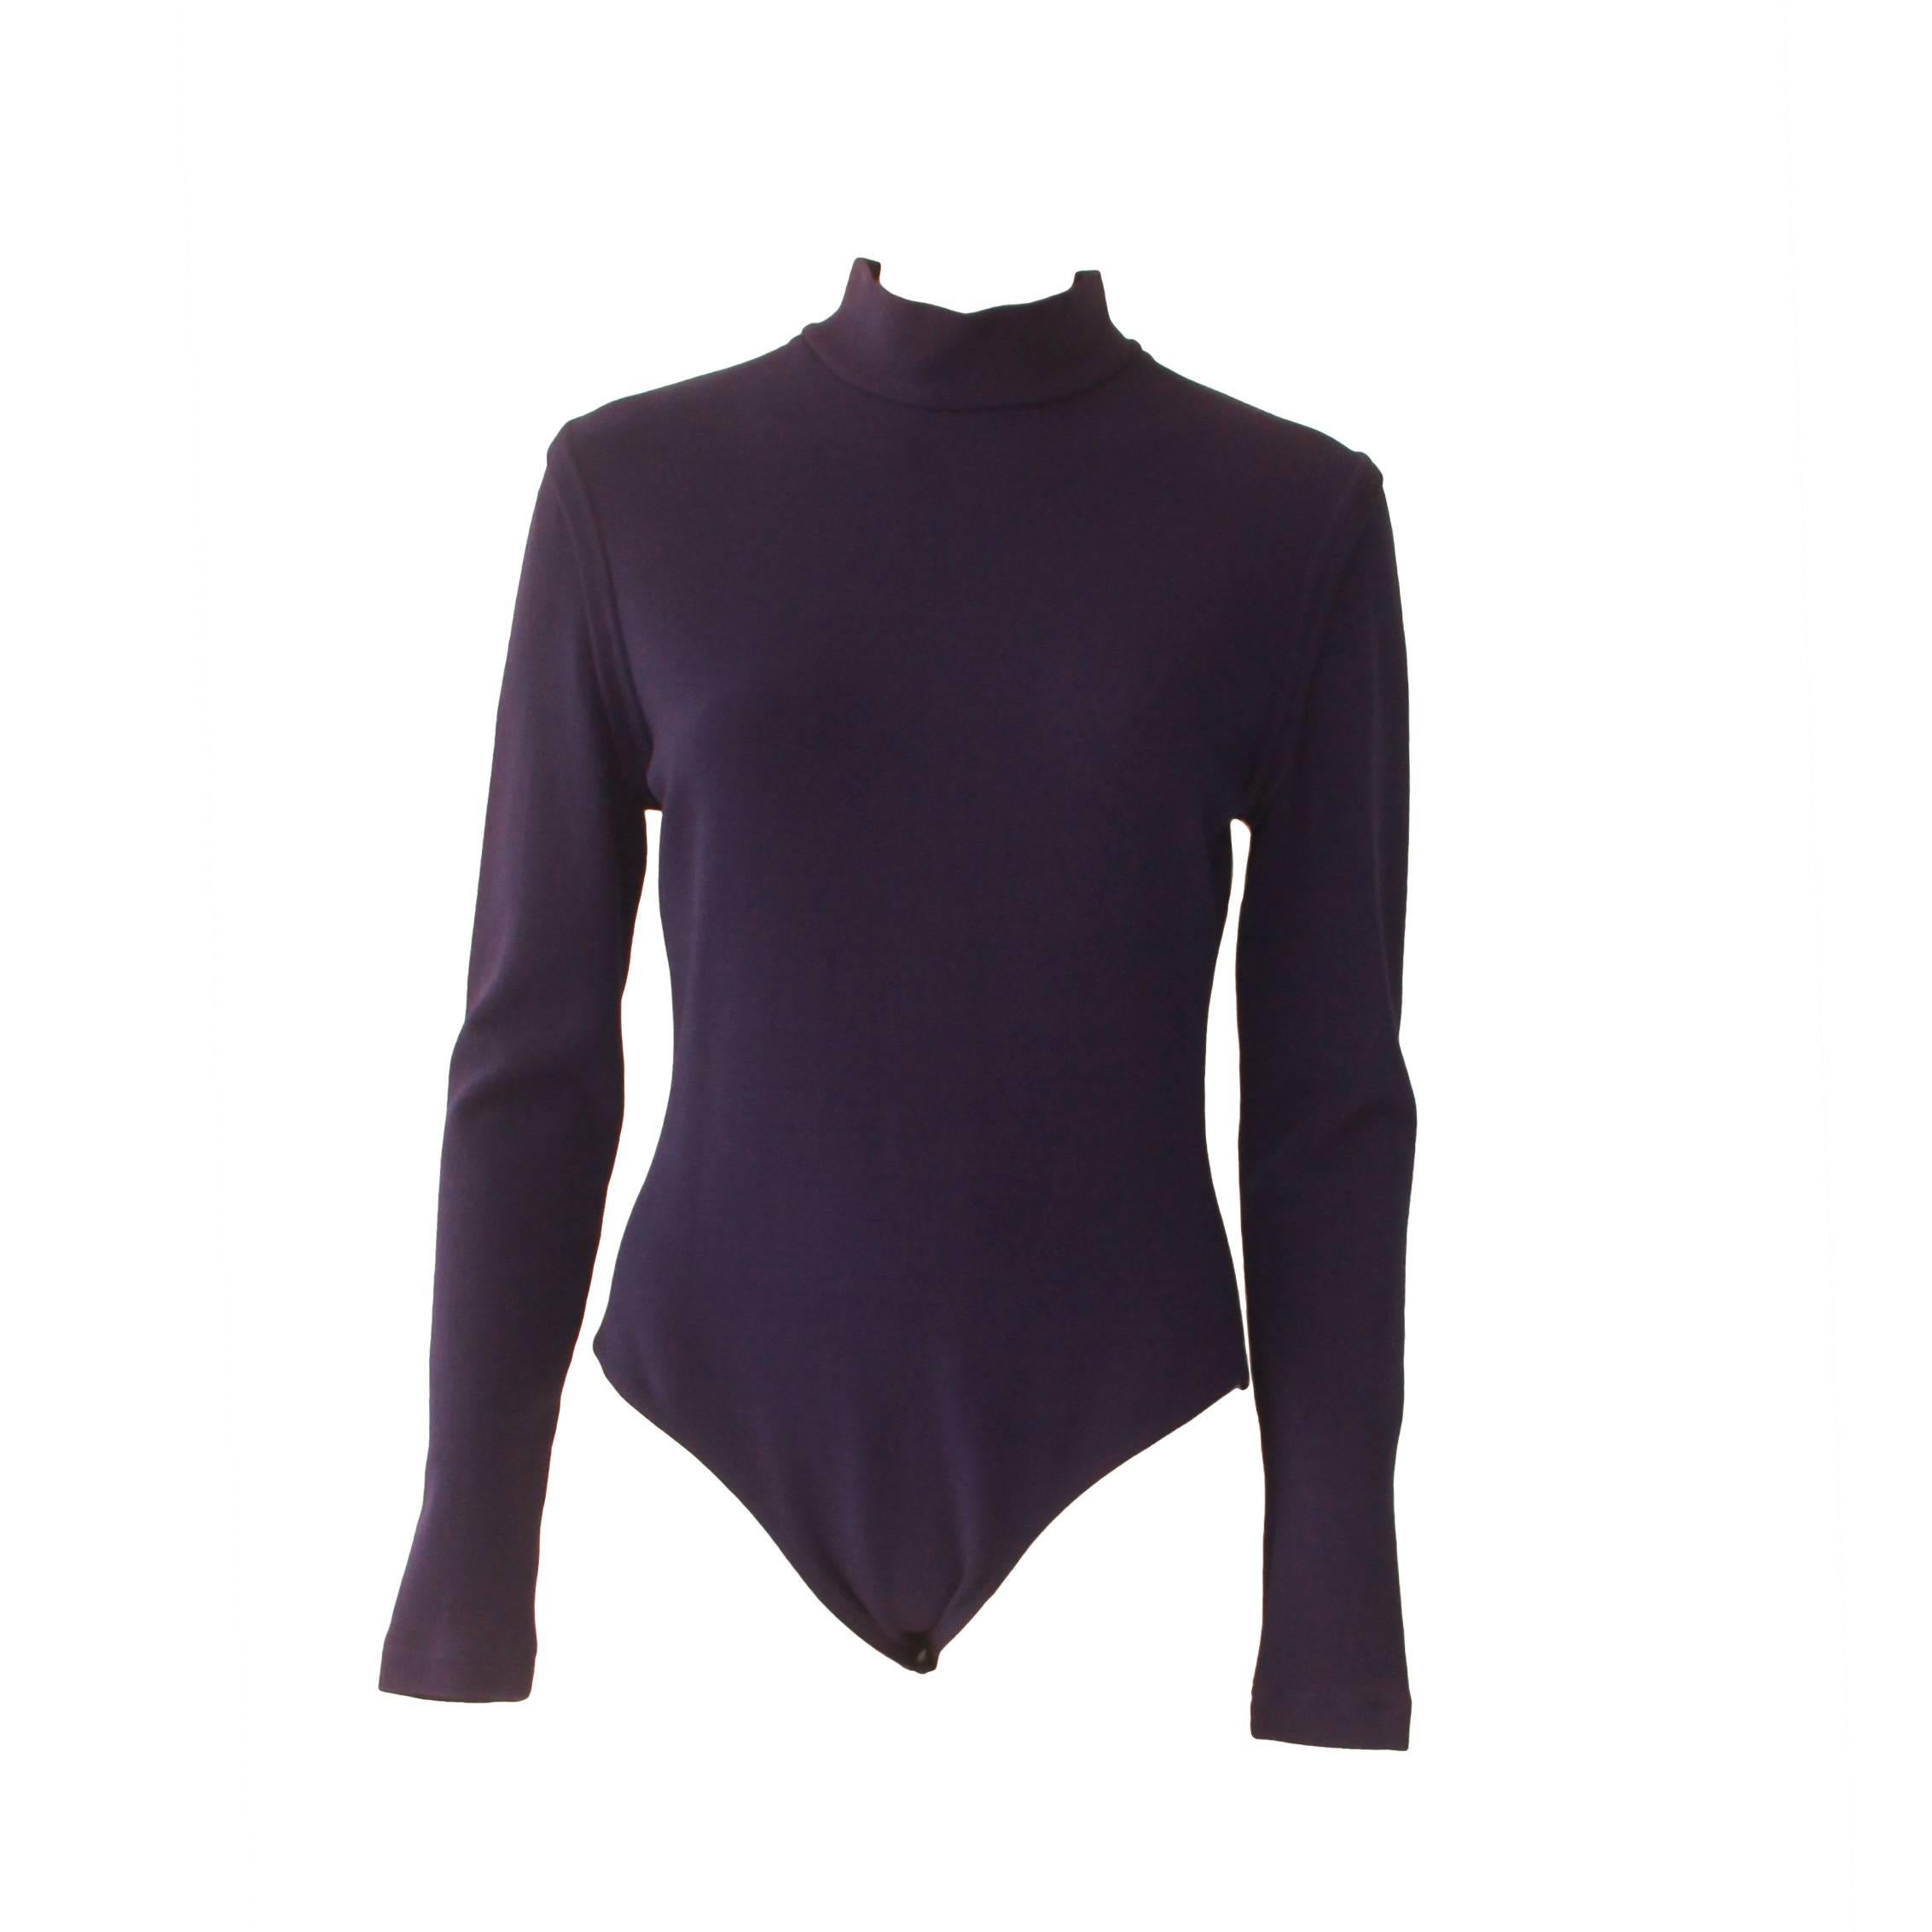 Rare Paco Rabanne Ribbed Bodysuit 1970's For Sale